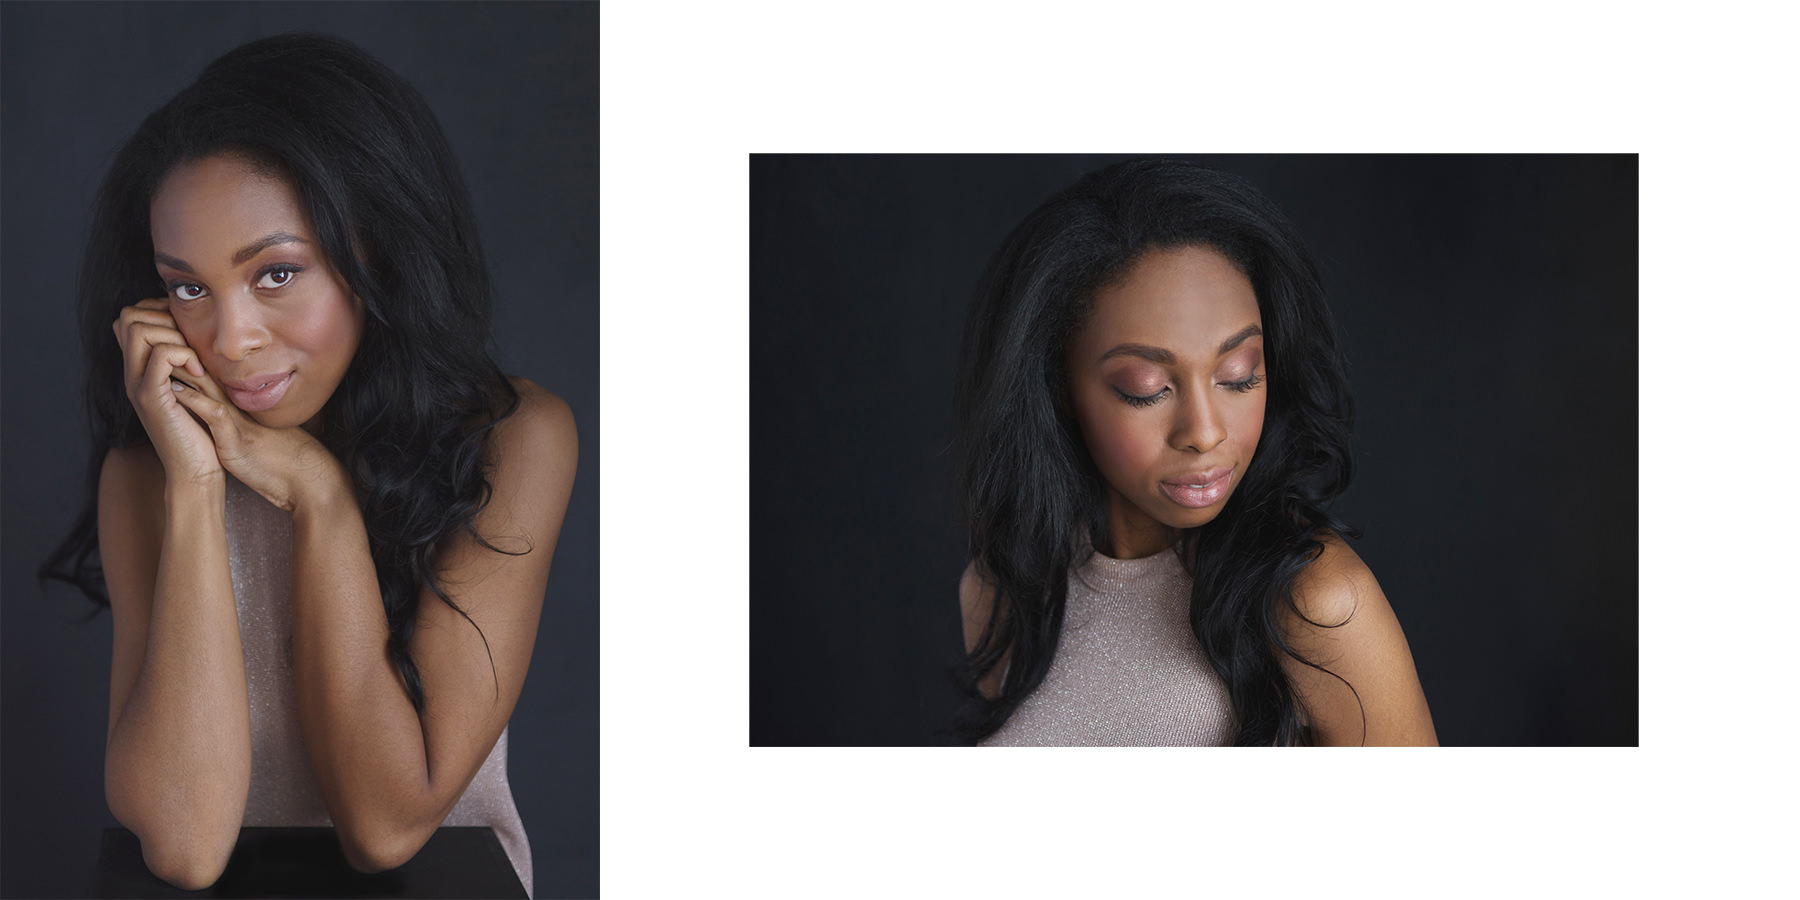 A portrait session with Yasmine Brown | Maine Portrait Photographer, Peter Greeno